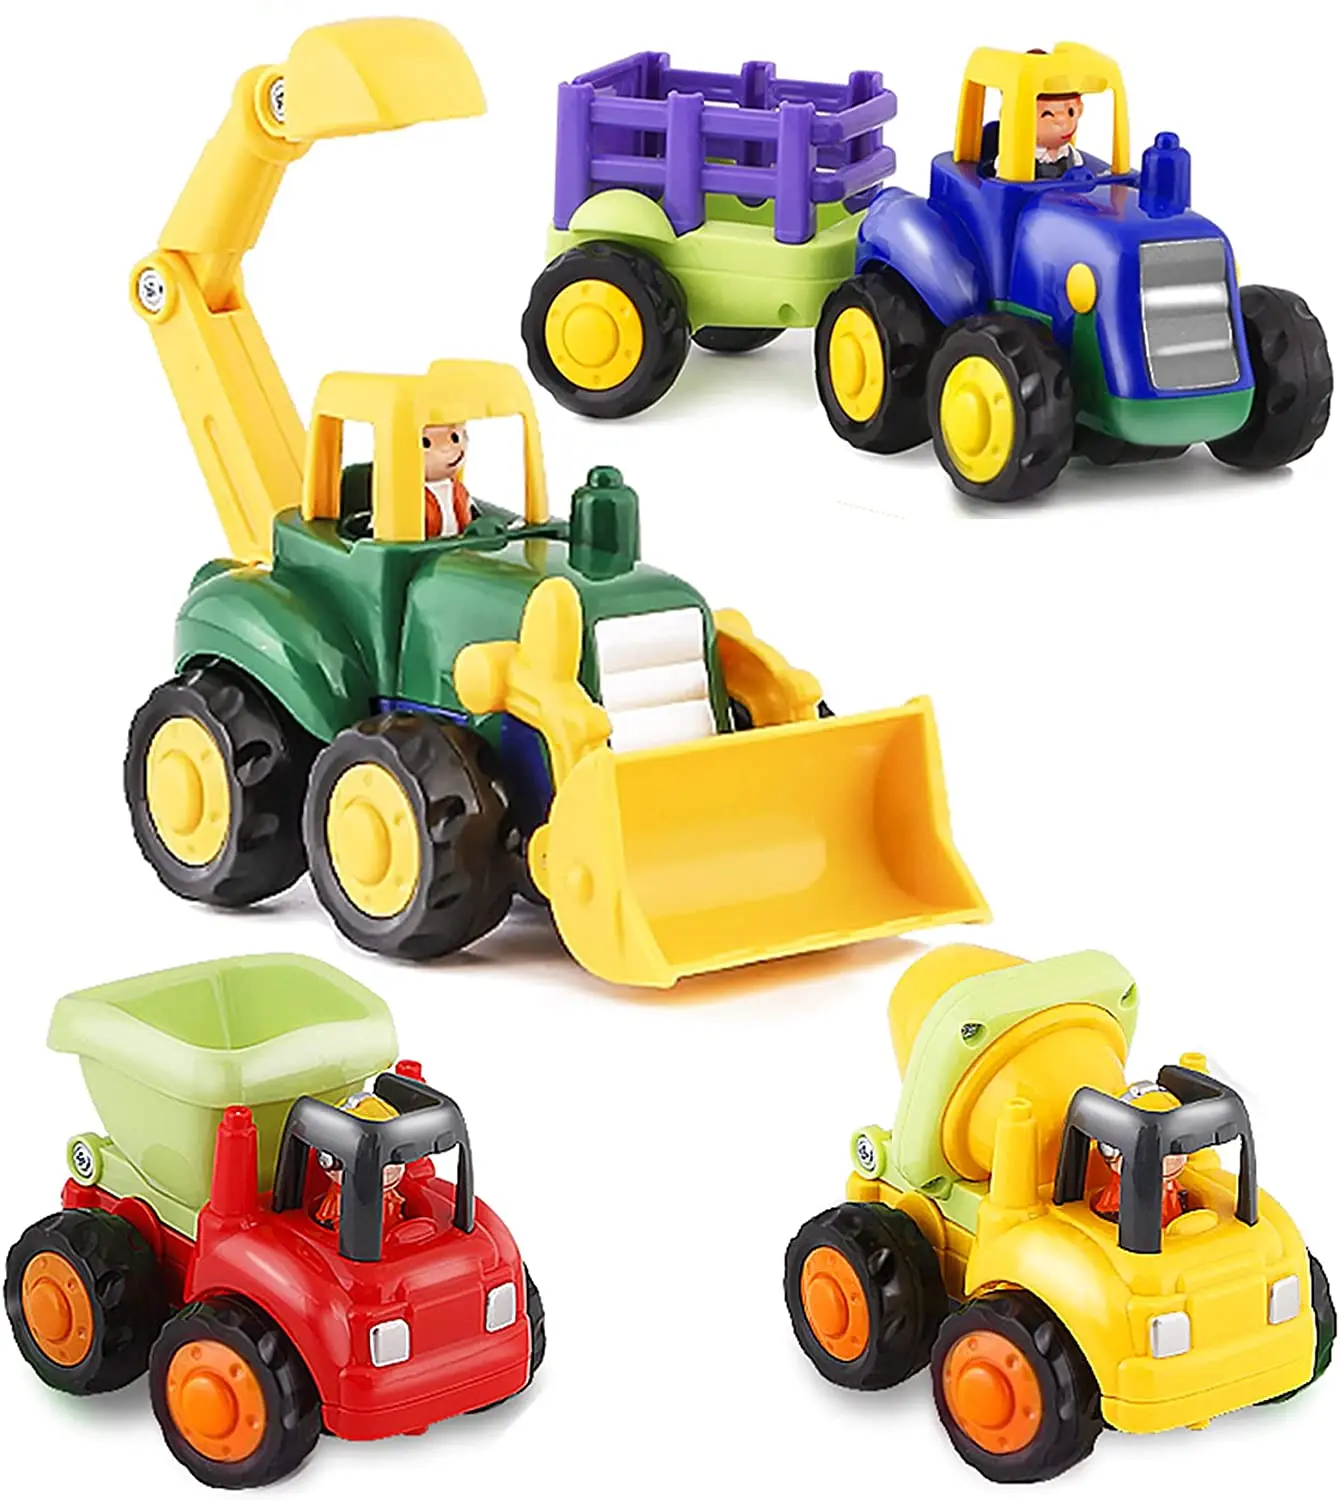 

Toy Car Trucks Friction Cars Construction Toys Set of 4 Dump Truck Toy Tractor Toys Bulldozer Cement Mixer Truck Preschool Gifts